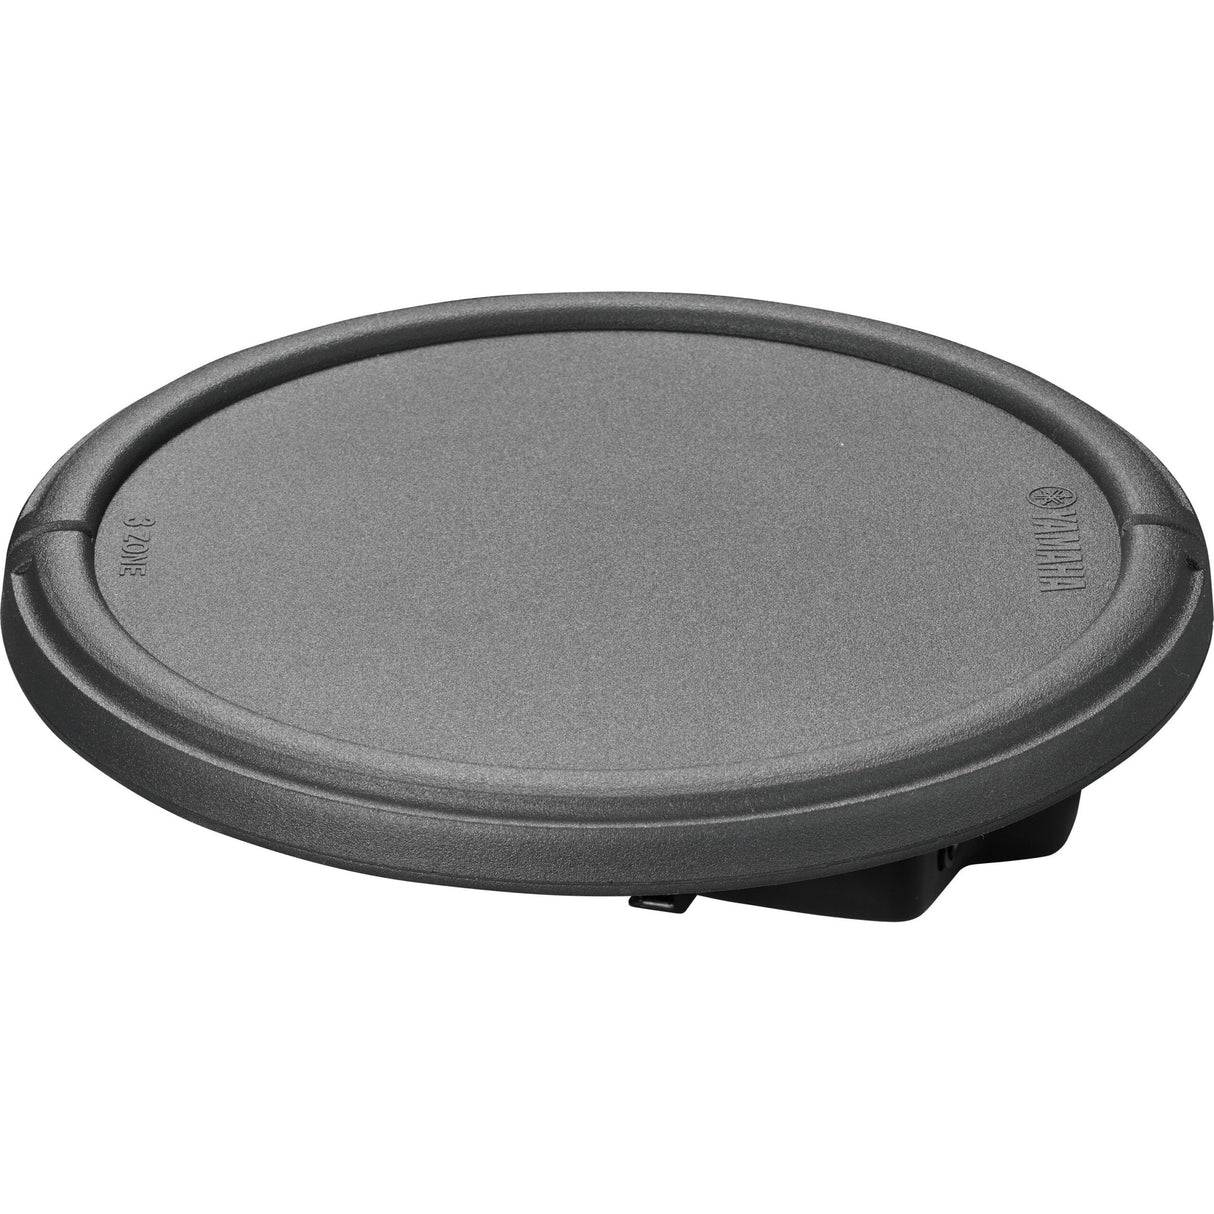 Yamaha TP70S 3-Zone 7.5 Inch Electronic Drum Pad